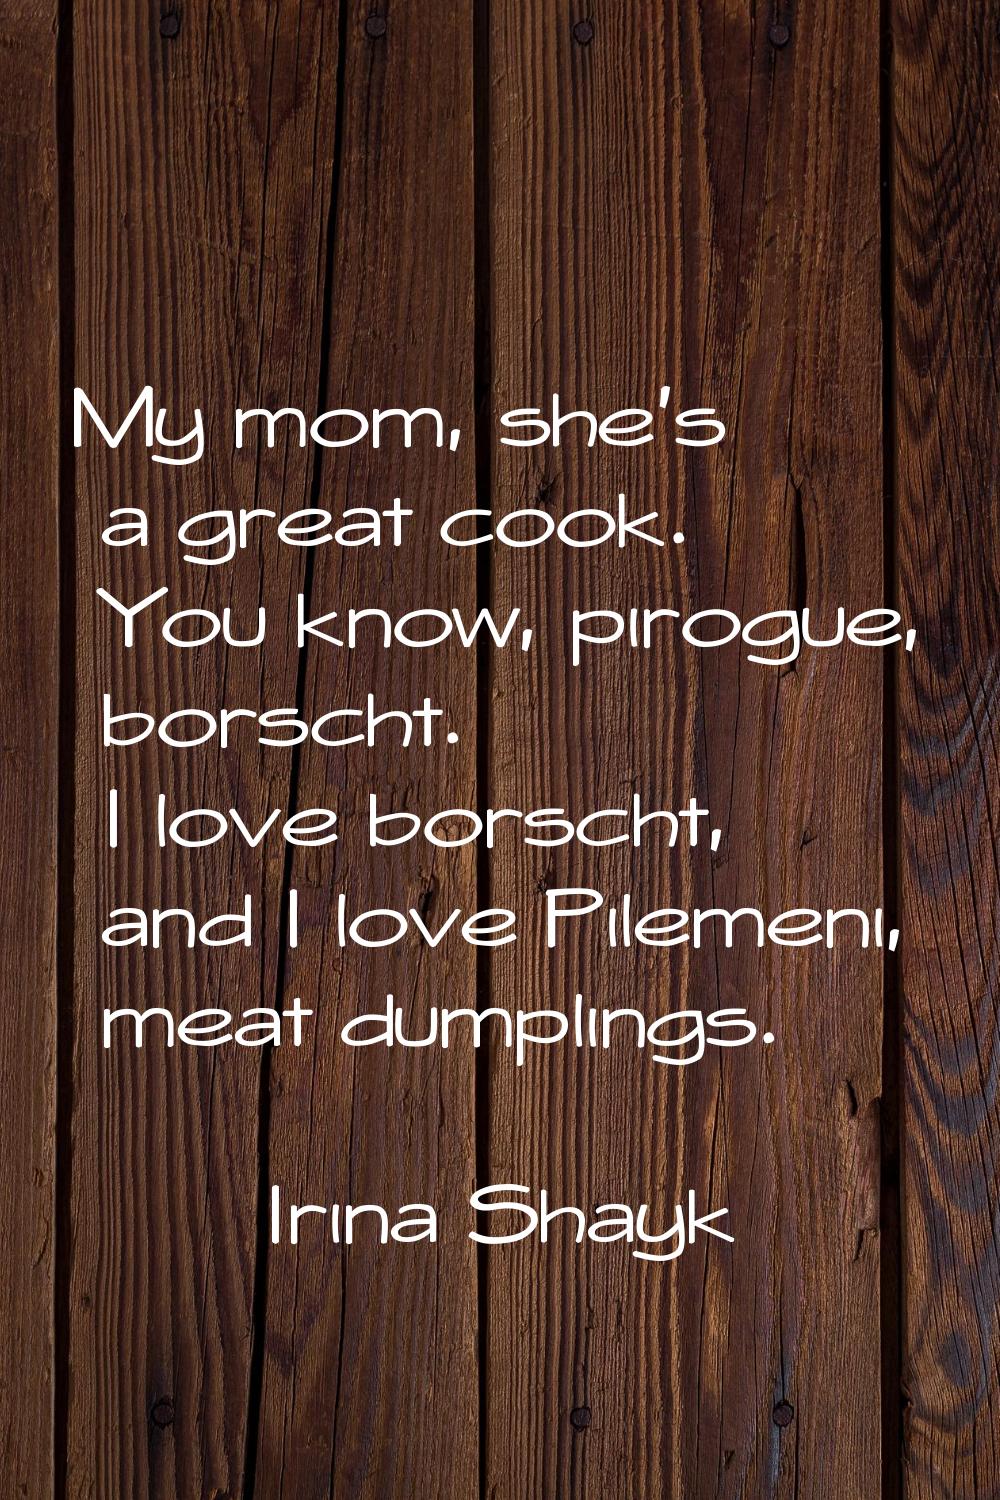 My mom, she's a great cook. You know, pirogue, borscht. I love borscht, and I love Pilemeni, meat d